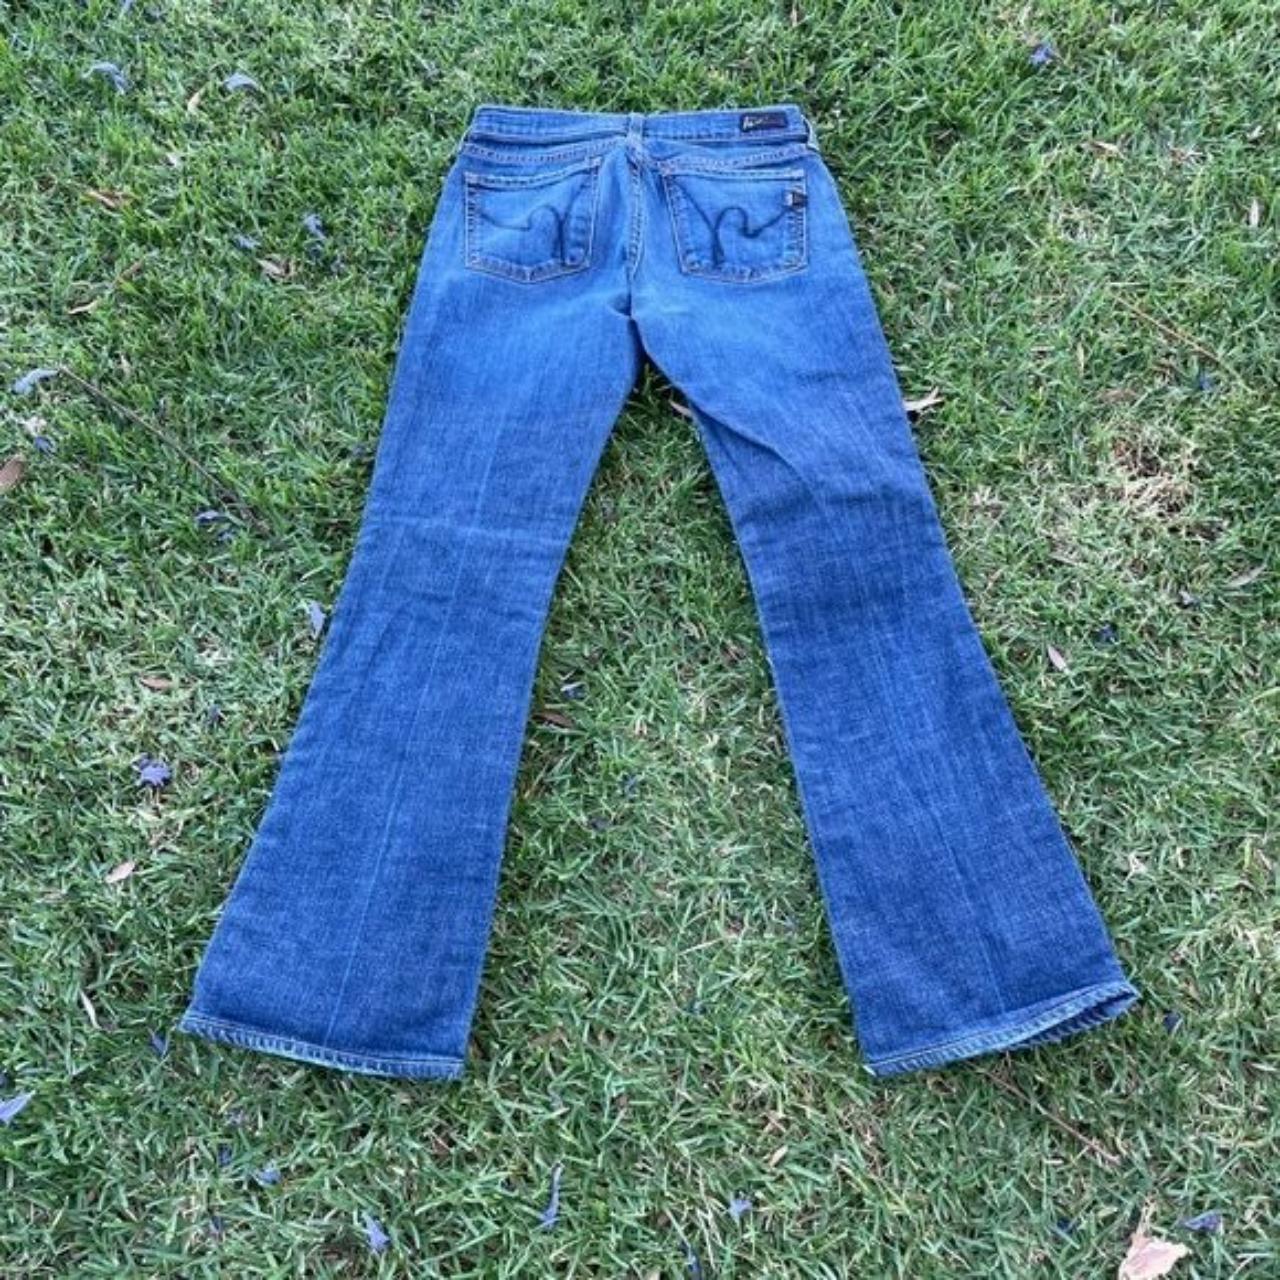 Vintage Citizens of Humanity Low Rise Boot Cut Kelly... - Depop